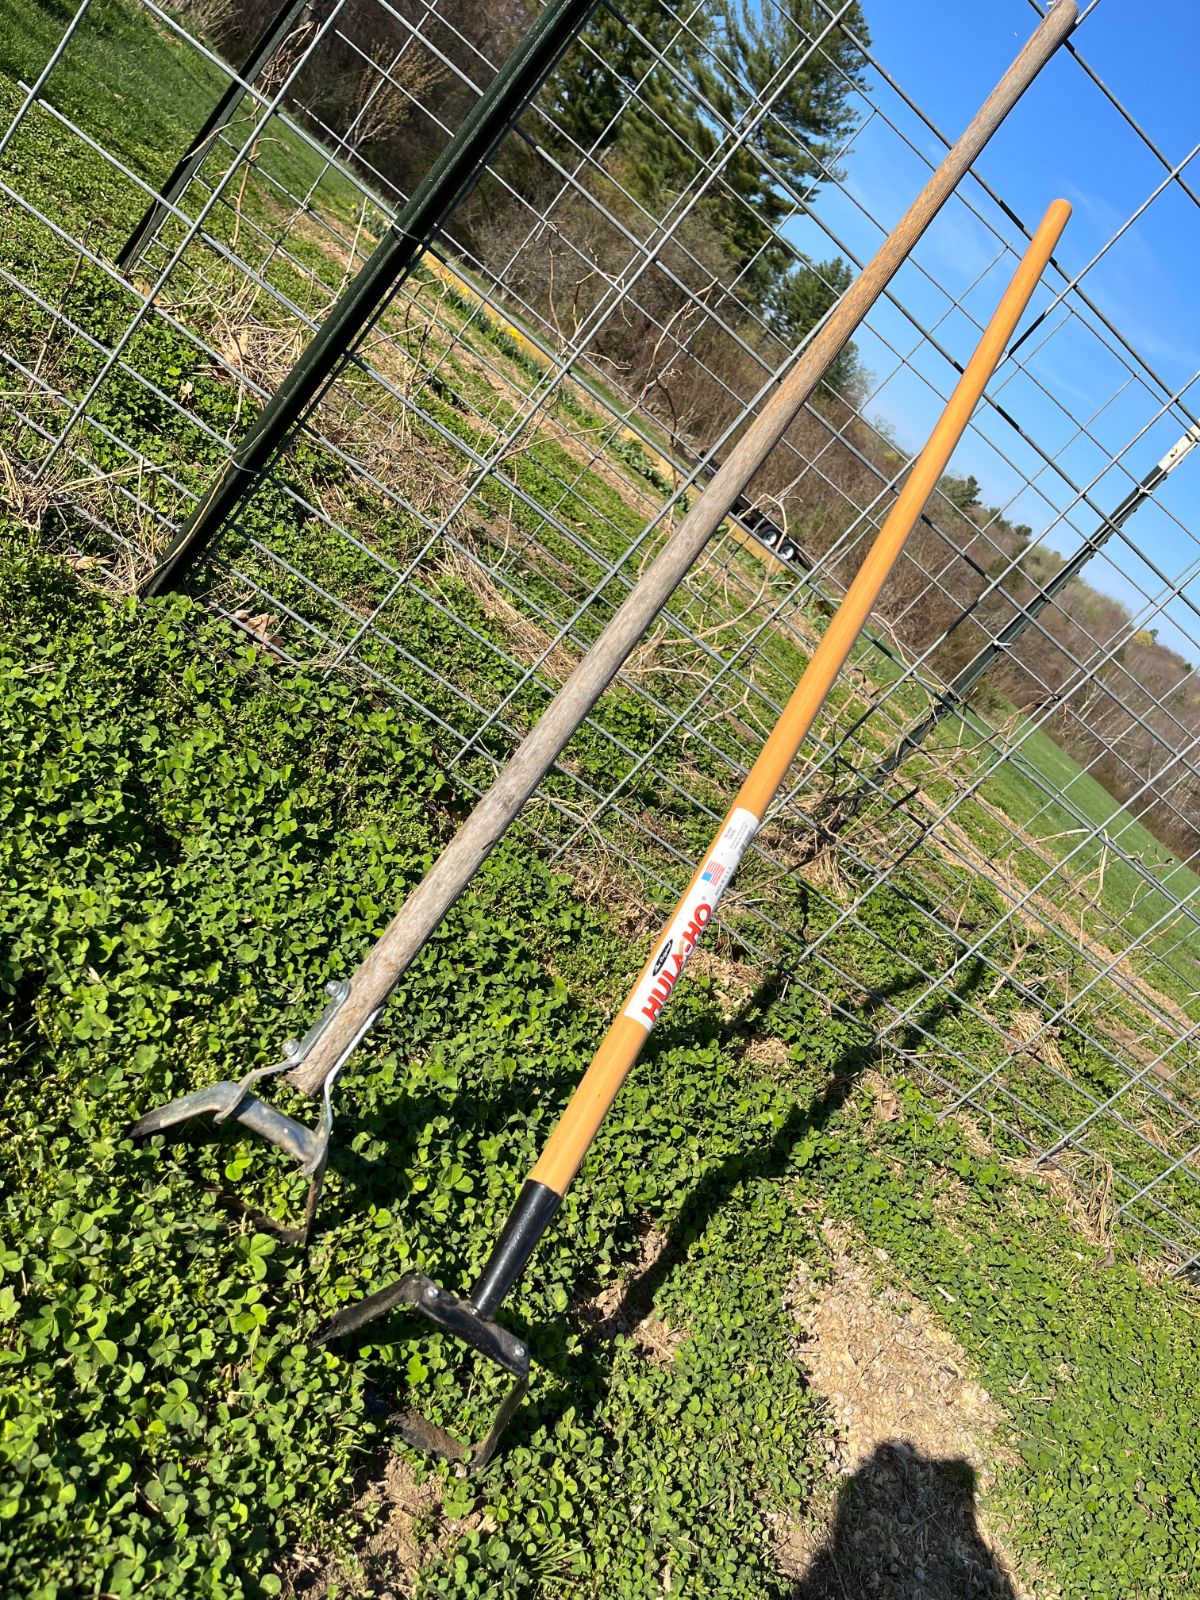 A hula hoe is leaned up against garden fencing